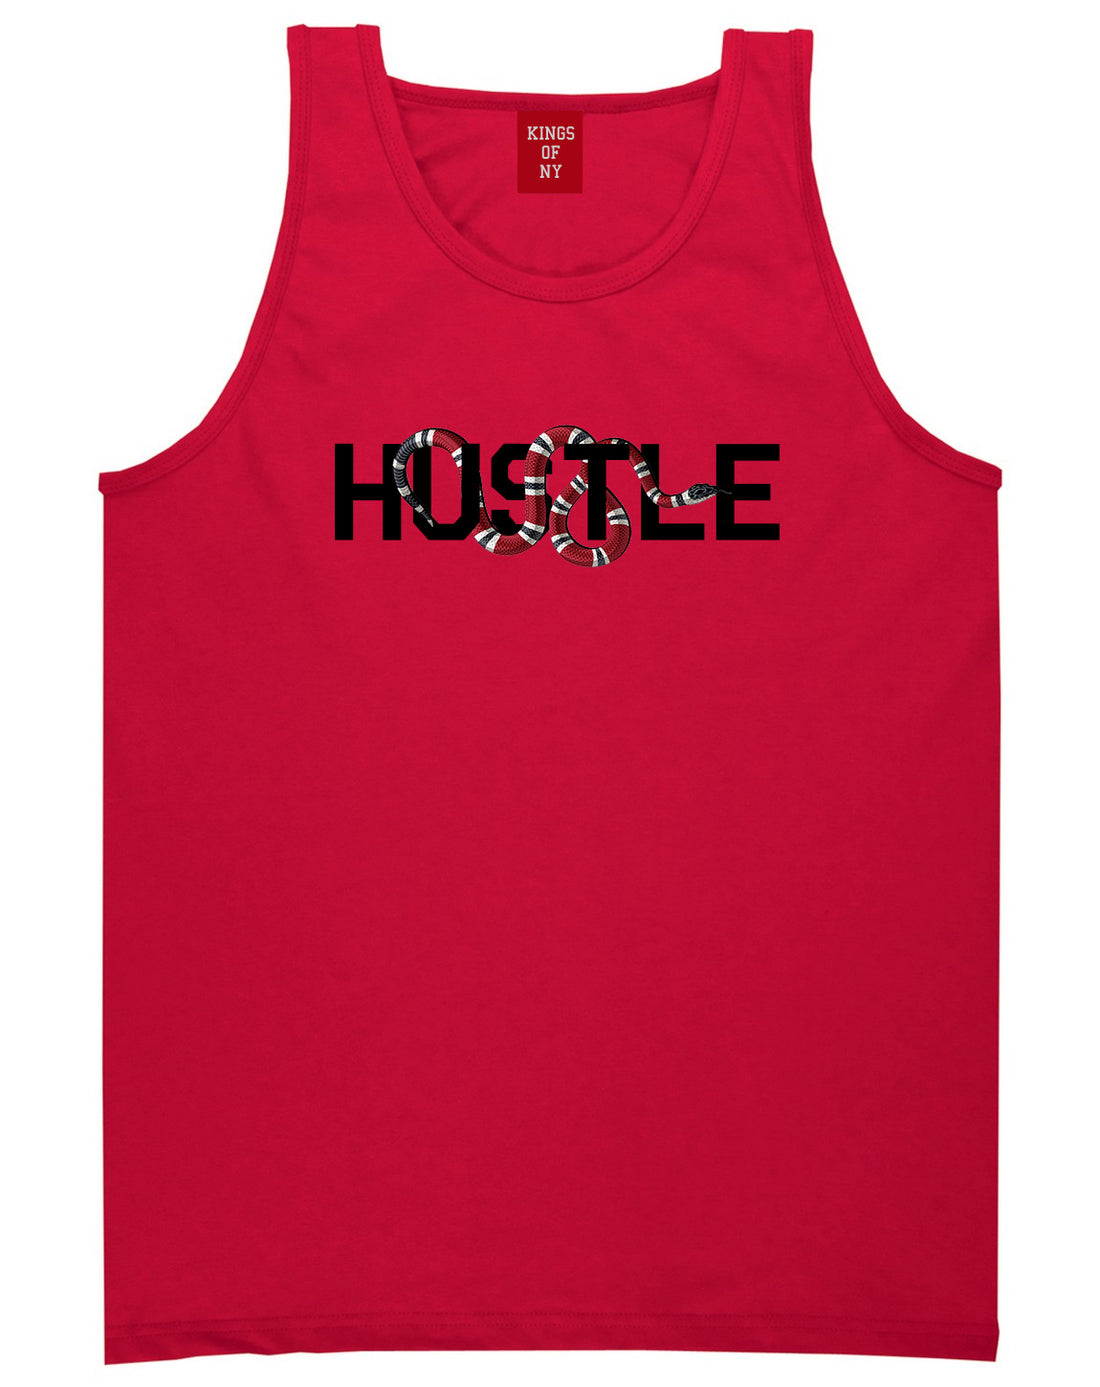 Hustle Snake Mens Tank Top Shirt Red by Kings Of NY